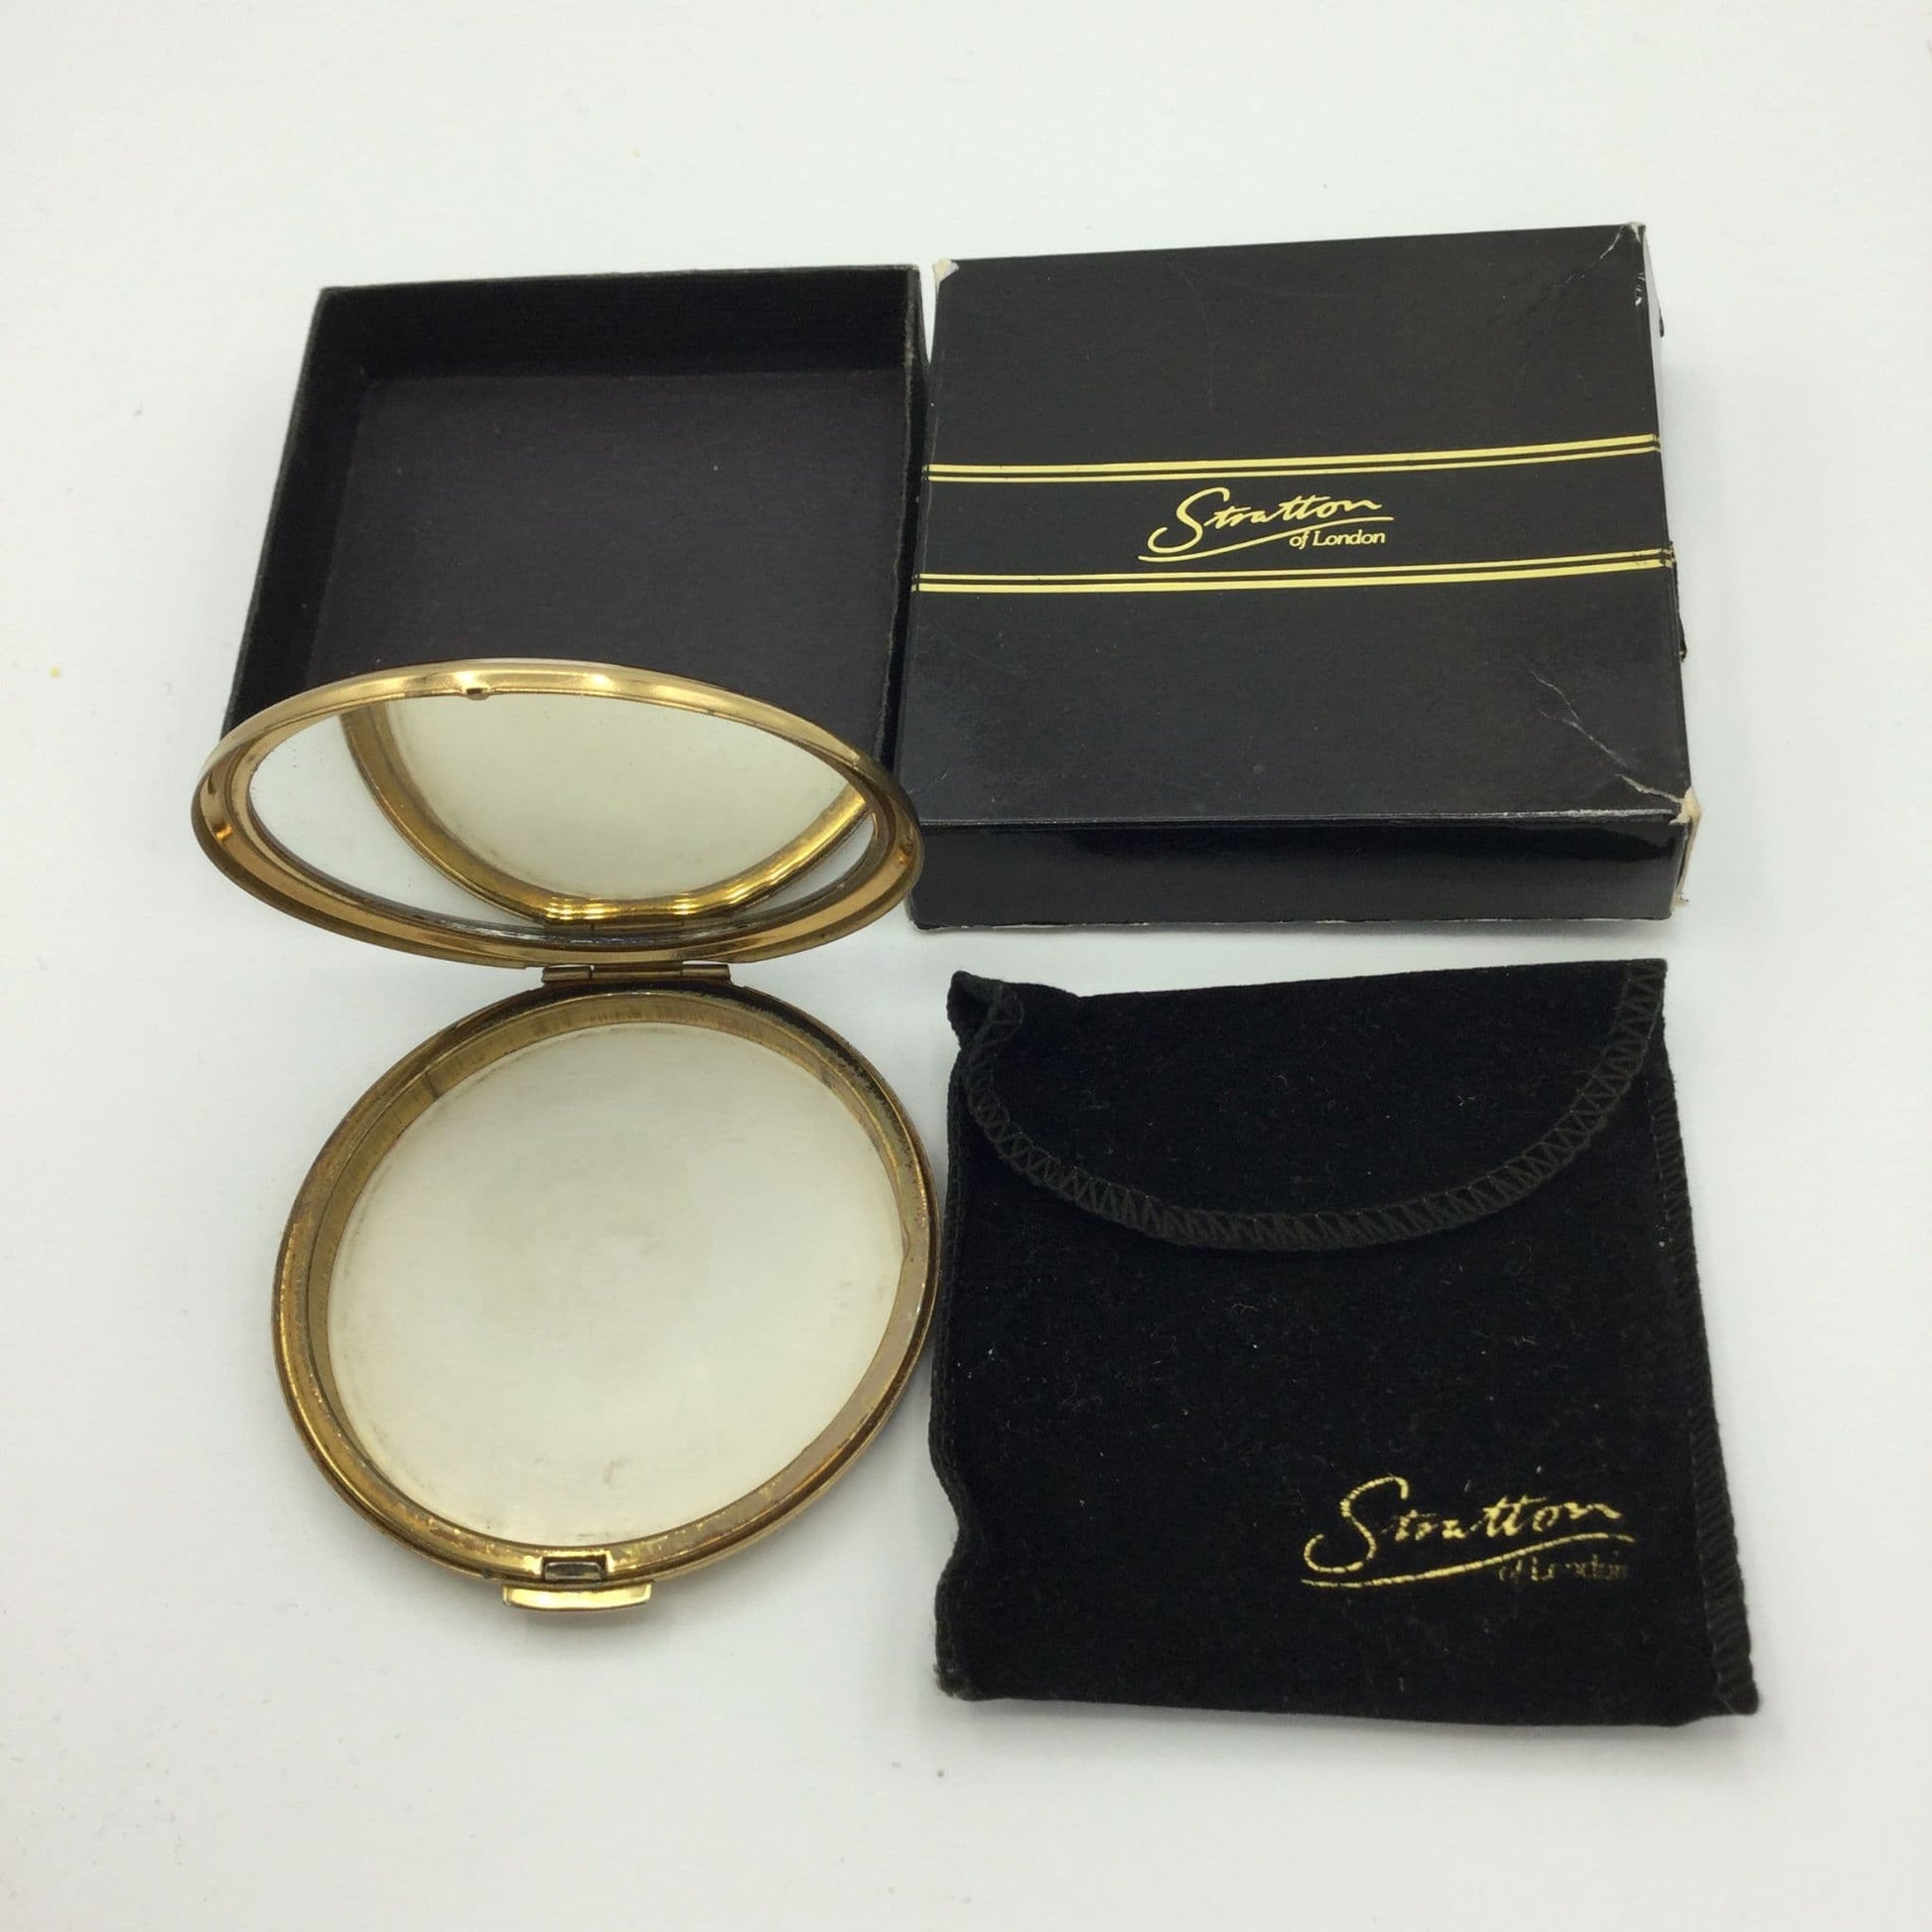 Stratton compact open with a clear mirror next to a Stratton gift box and pouch